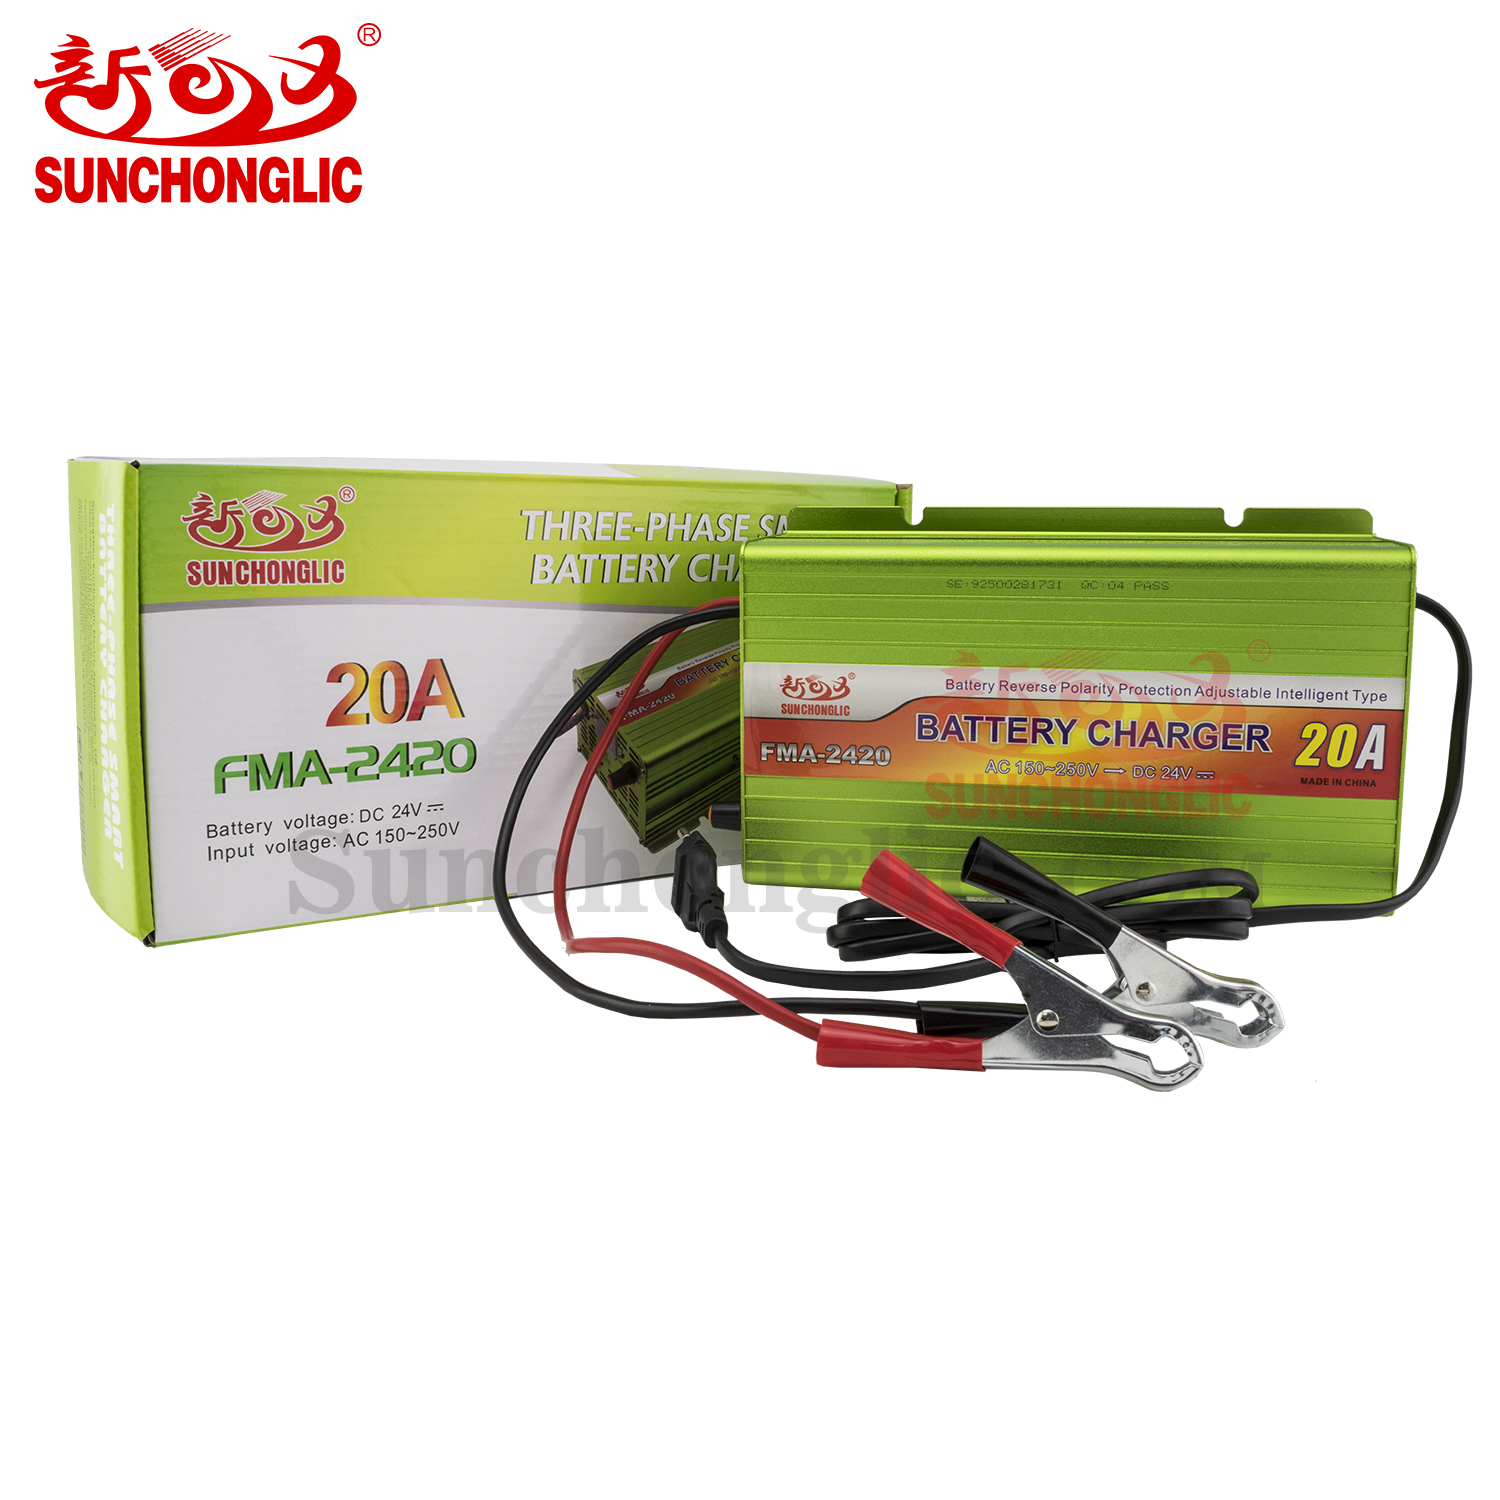 Sunchonglic 24V 20A three-phase lead acid car battery charger 